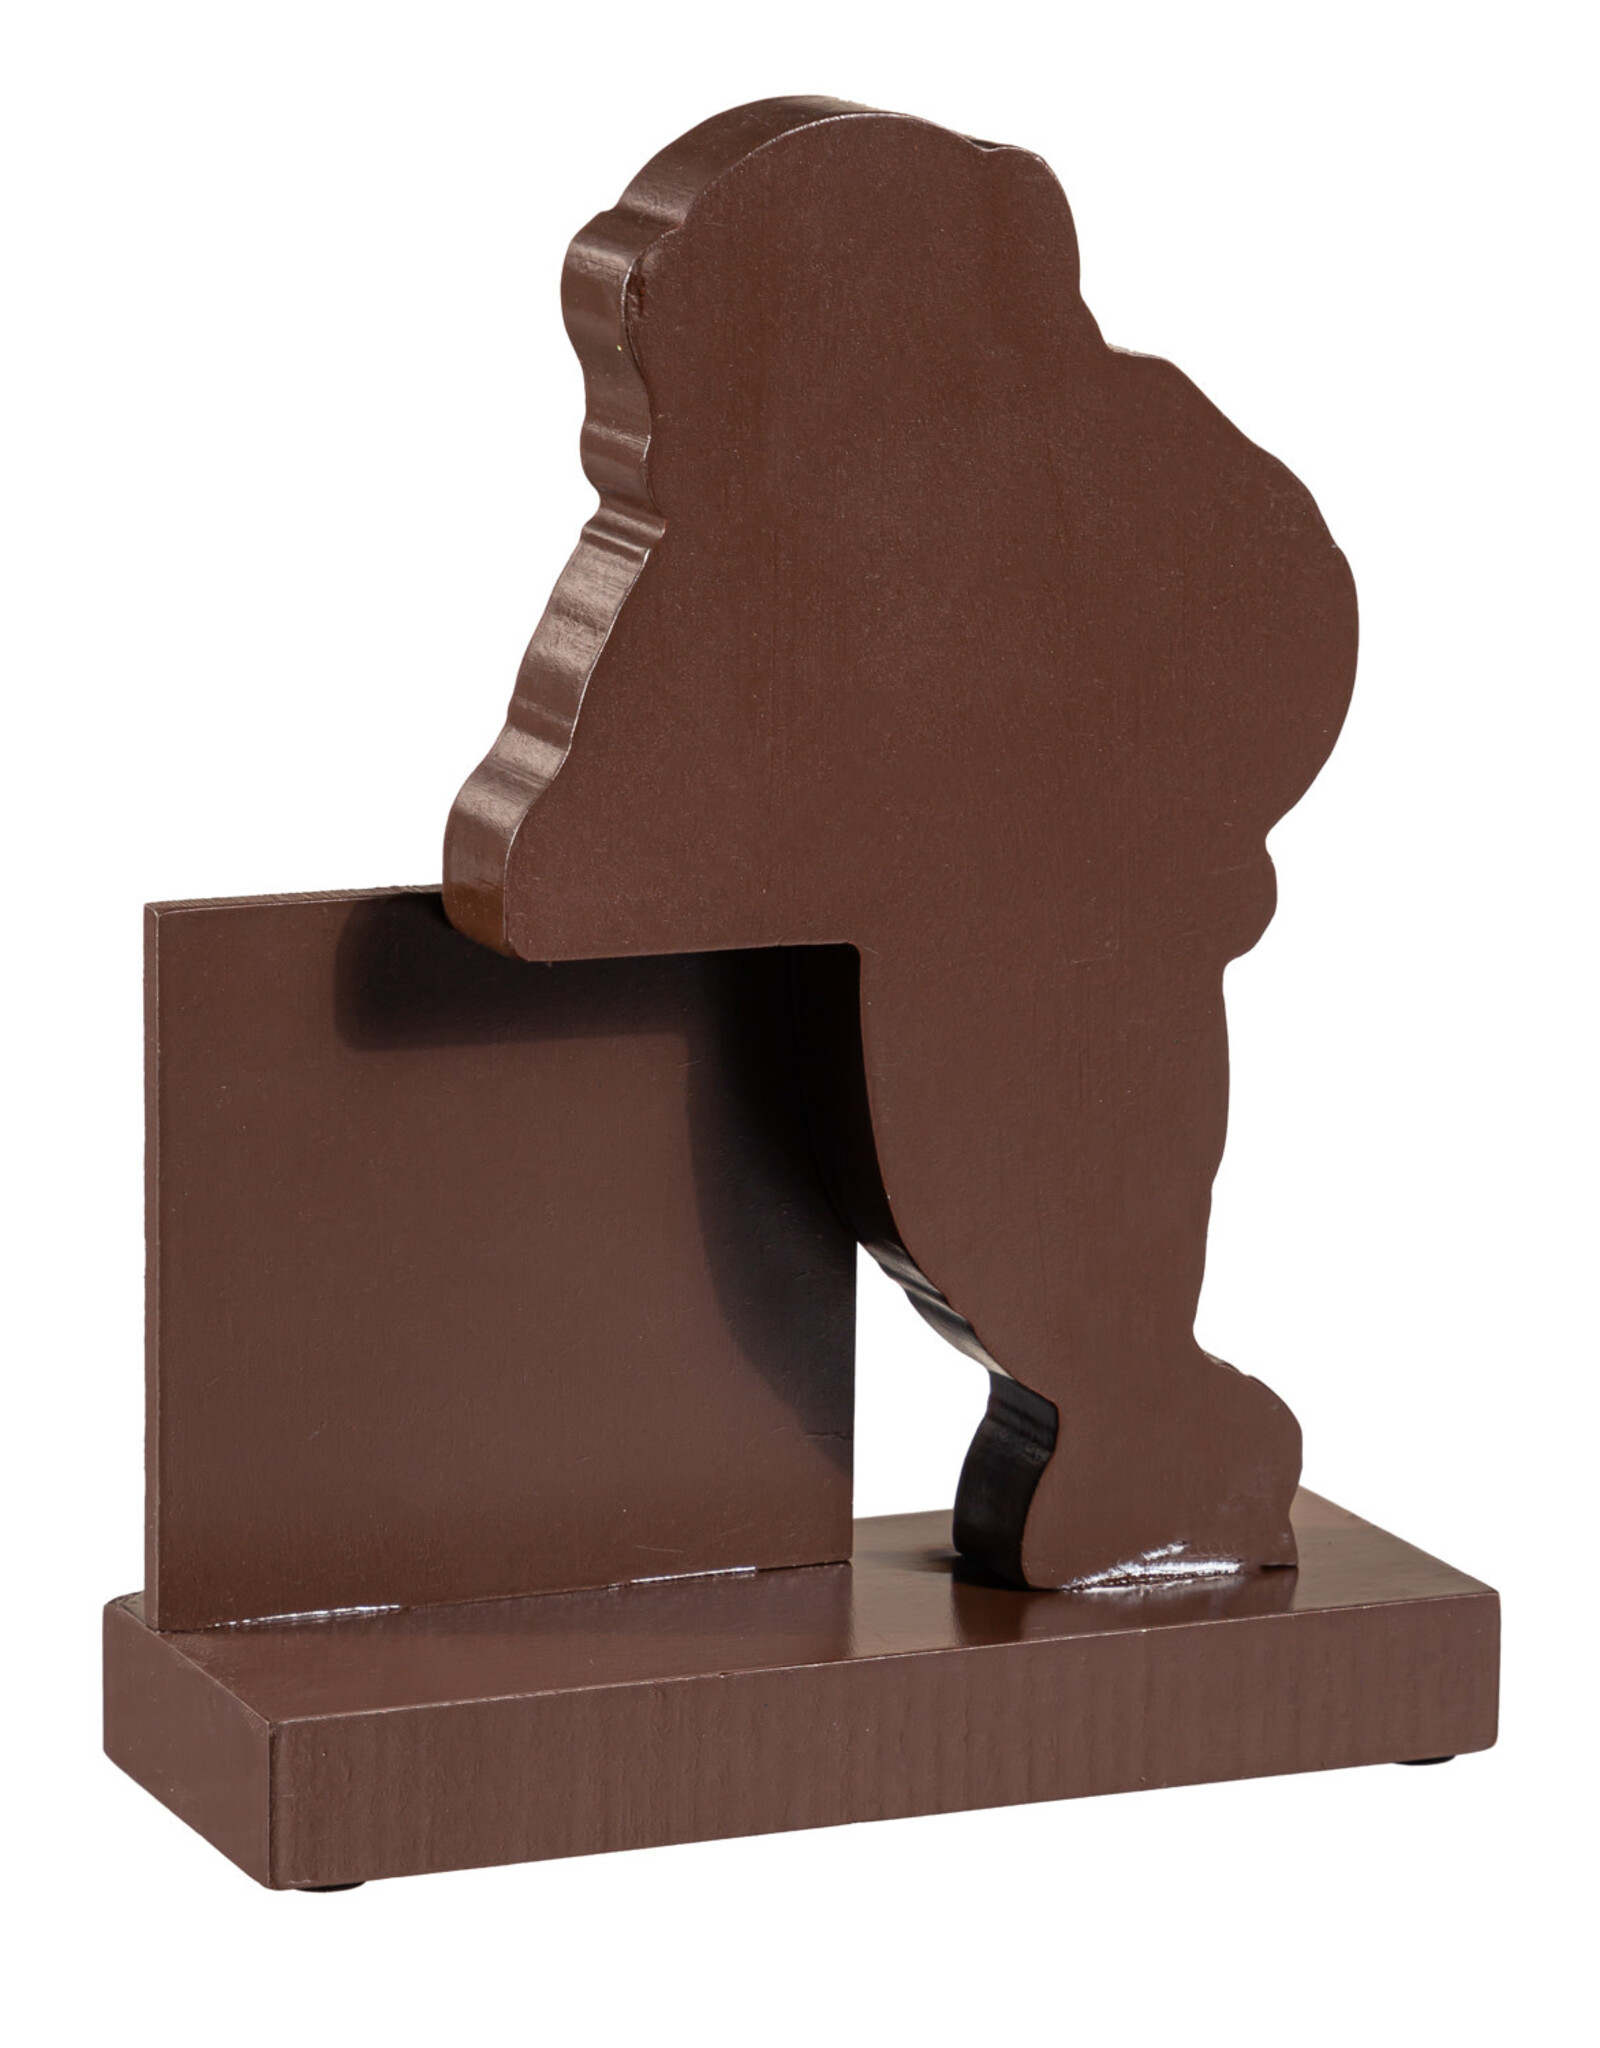 EVERGREEN Cleveland Browns Wood Mascot Standee With Team Logo